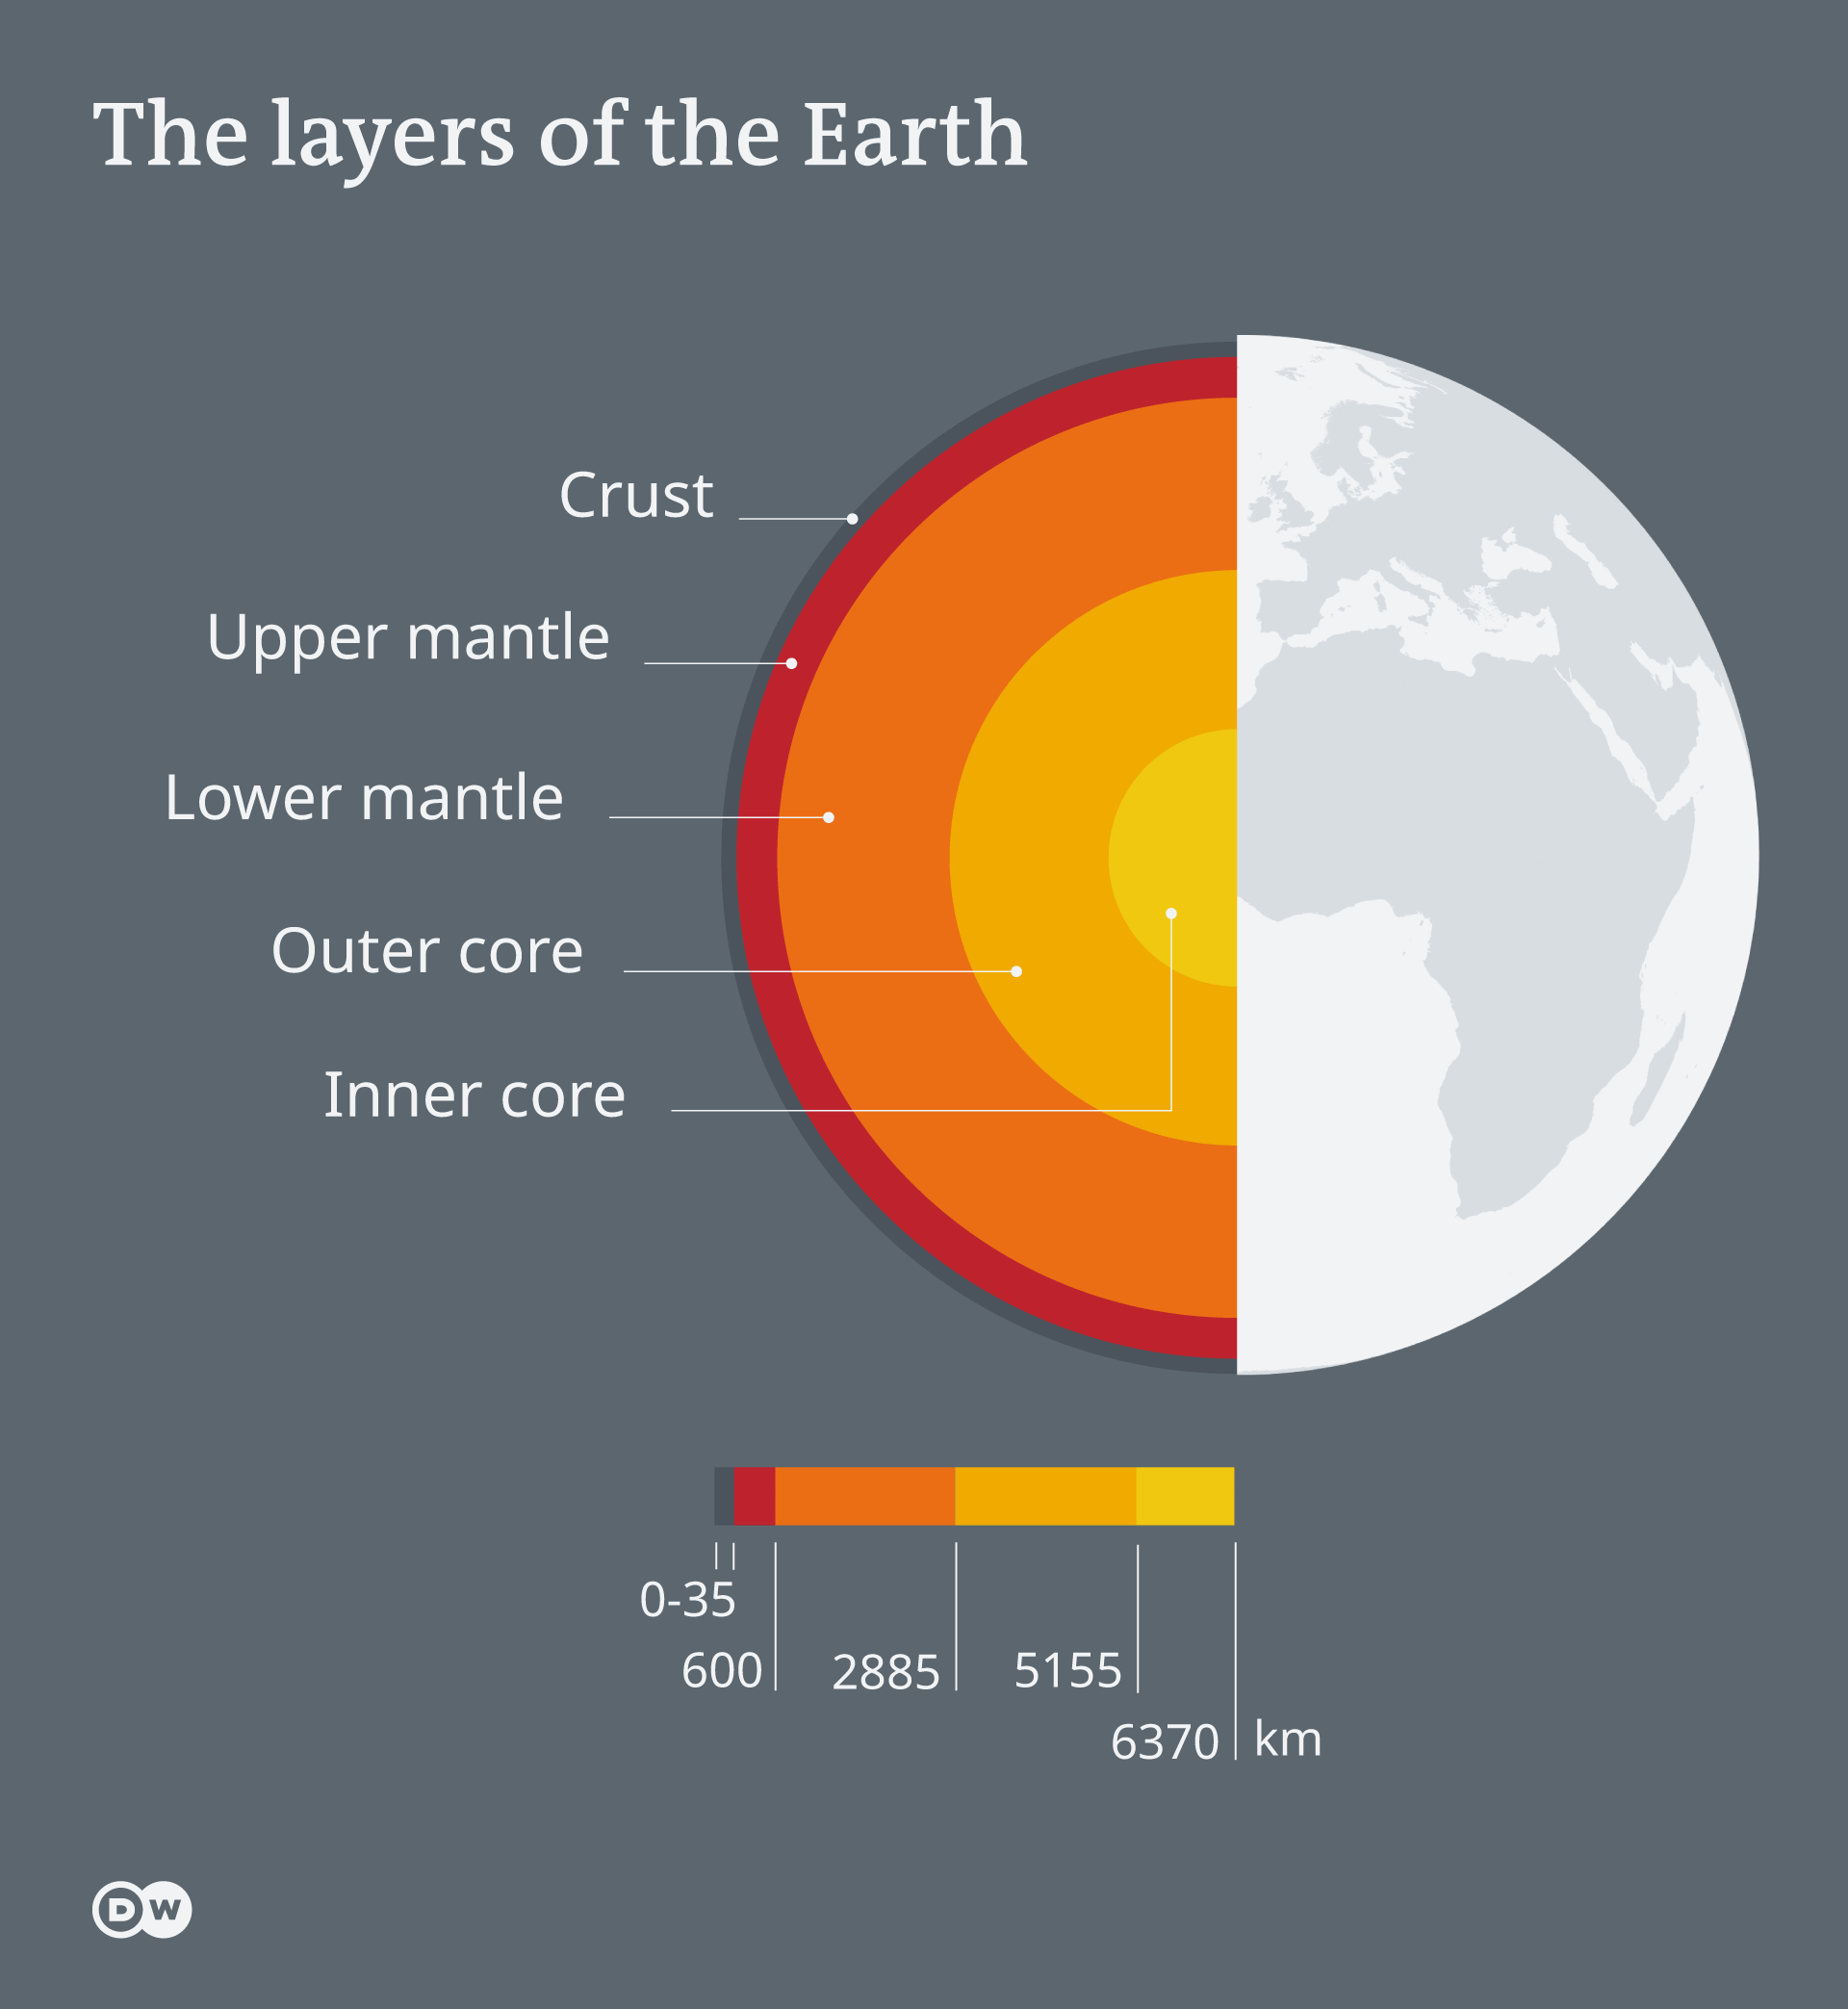 An infographic showing the layers of the Earth: the crust, upper mantel, lower mantel, outer core and inner core.